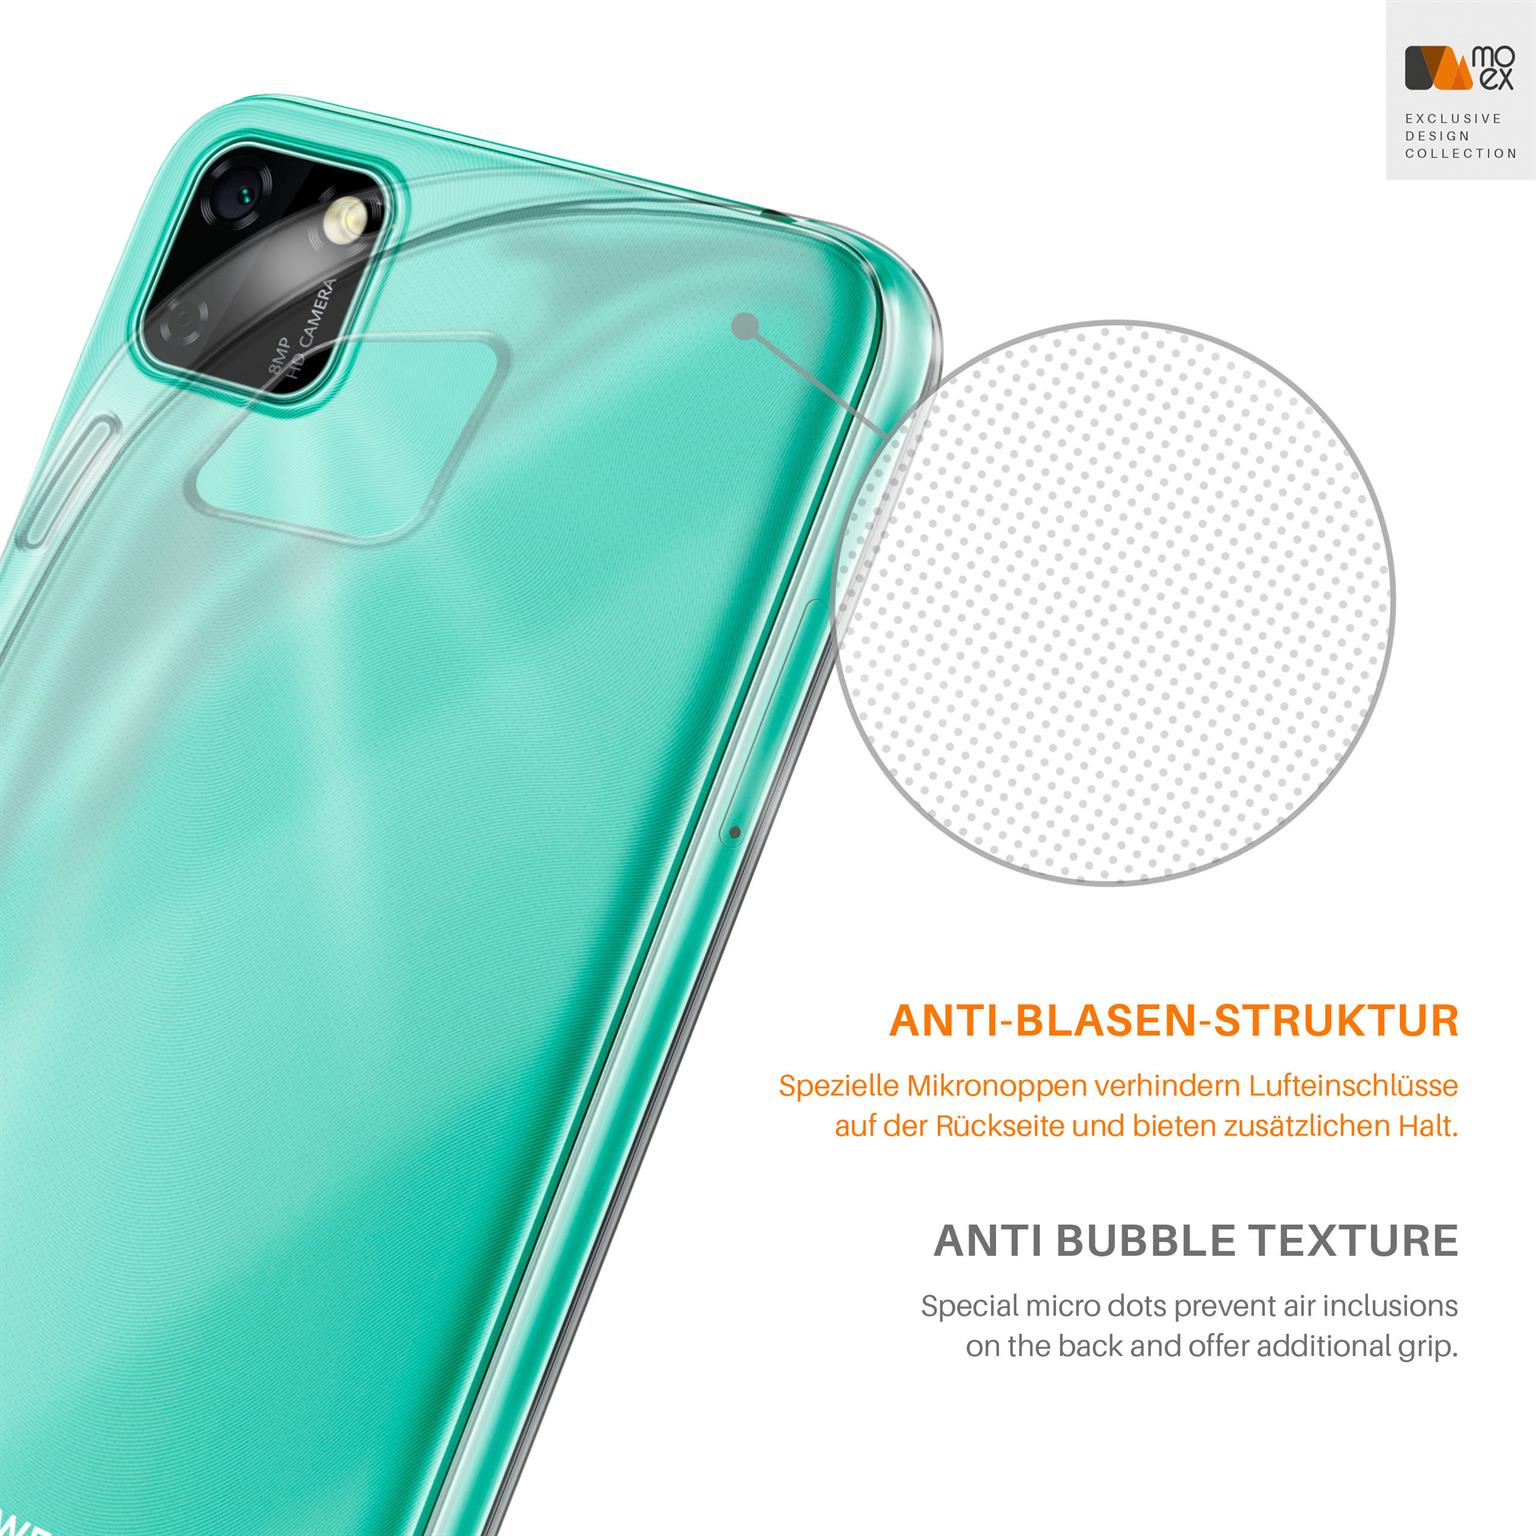 MOEX Aero Case, Crystal-Clear Huawei, Y5p, Backcover